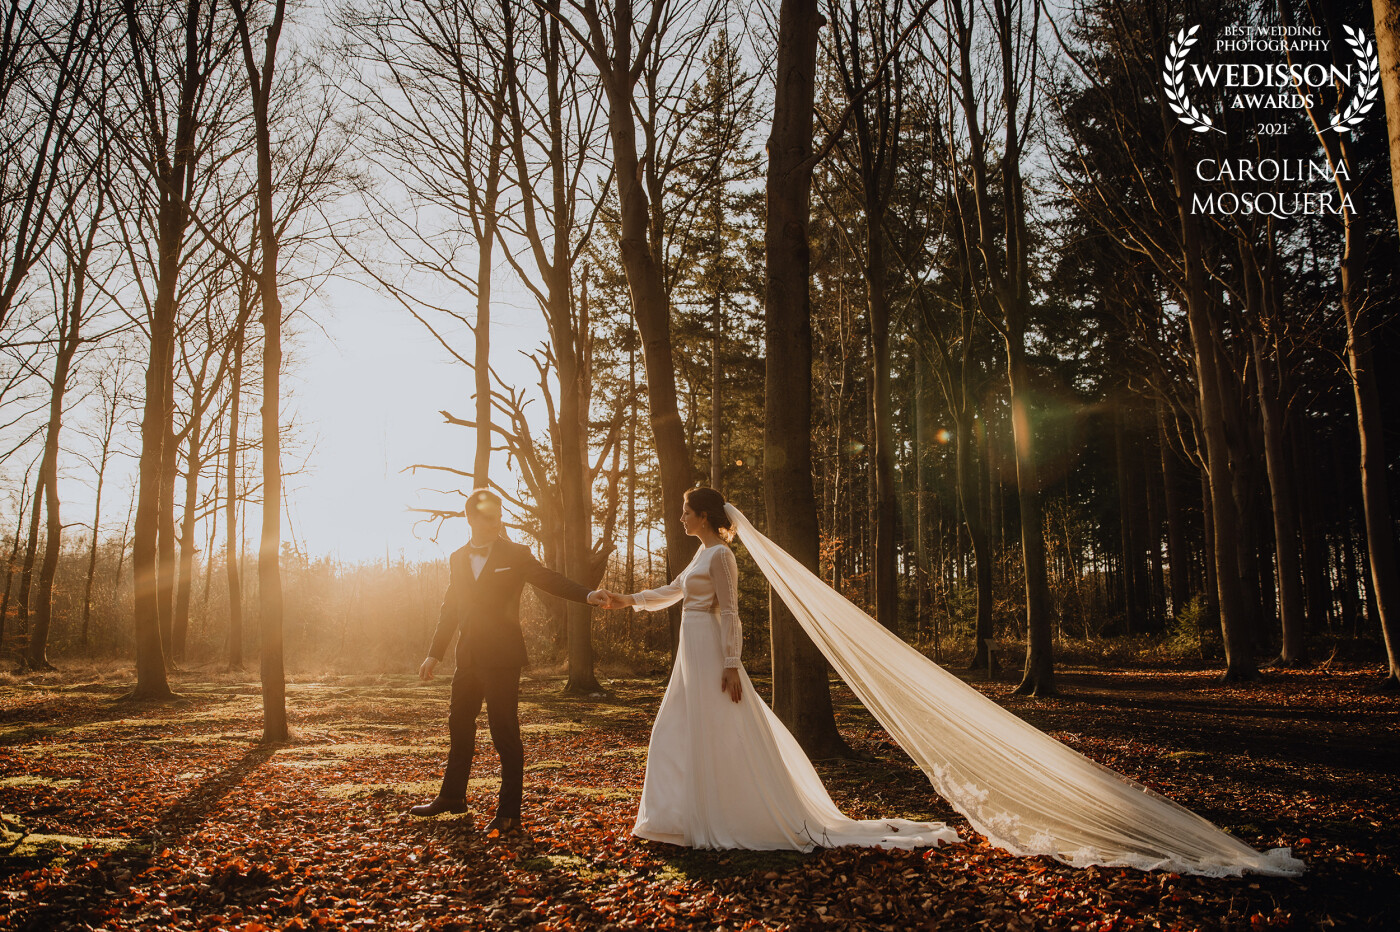 This wedding image is taken two weeks ago at a Belgian civil wedding. We have been waiting for a beautiful sunset to take wedding pictures. Such a stunning dress, veil...We are in love with this one.